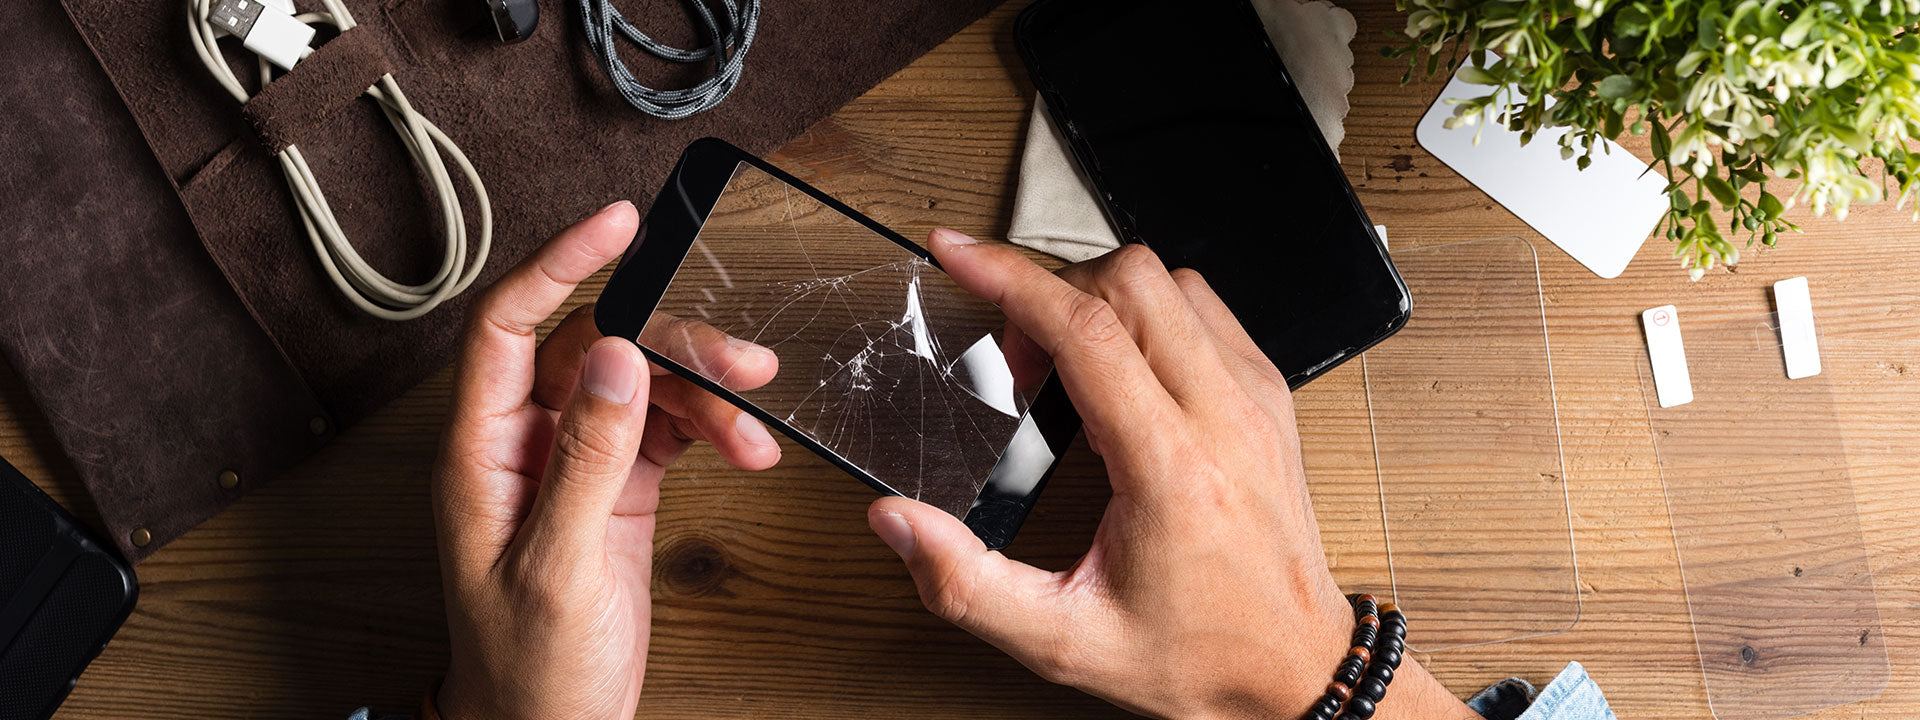 6 Risks of Using a Cracked Screen Protector and How to Remove It